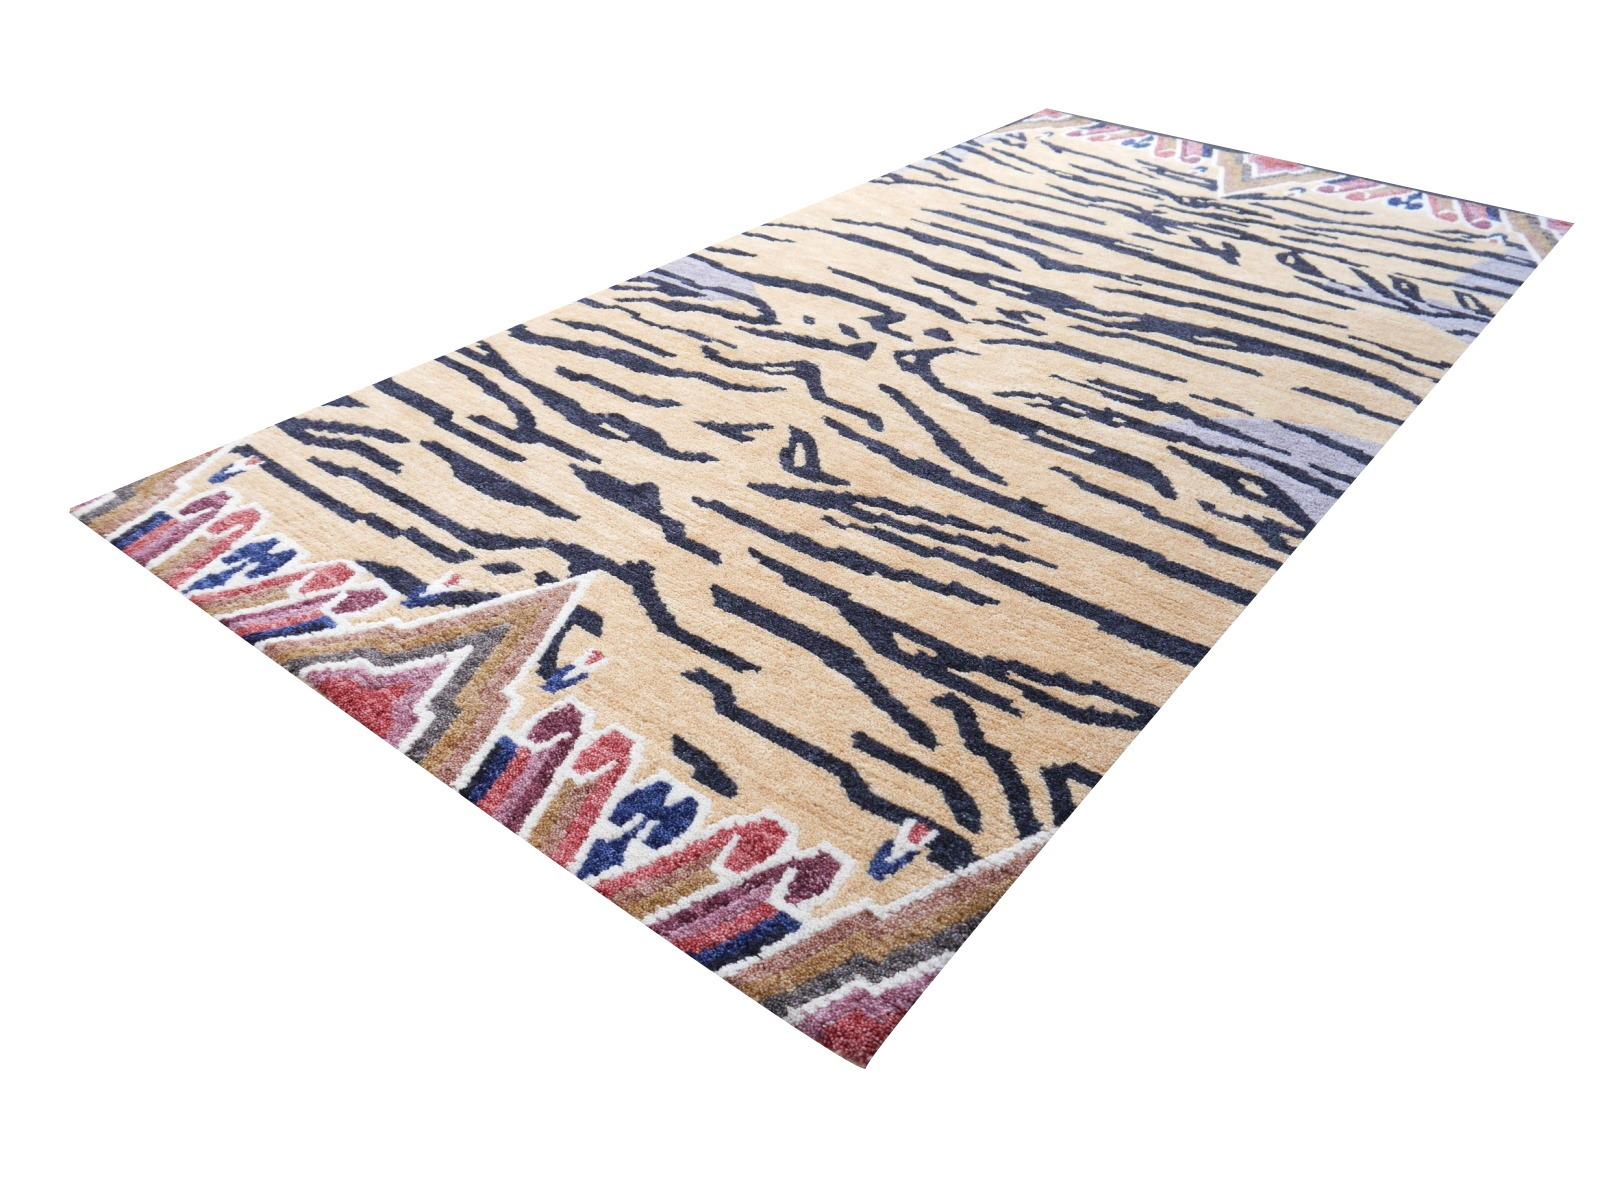 Tibetan Tiger Rug Pure Wool Hand Knotted by Djoharian Collection Antique Design 5